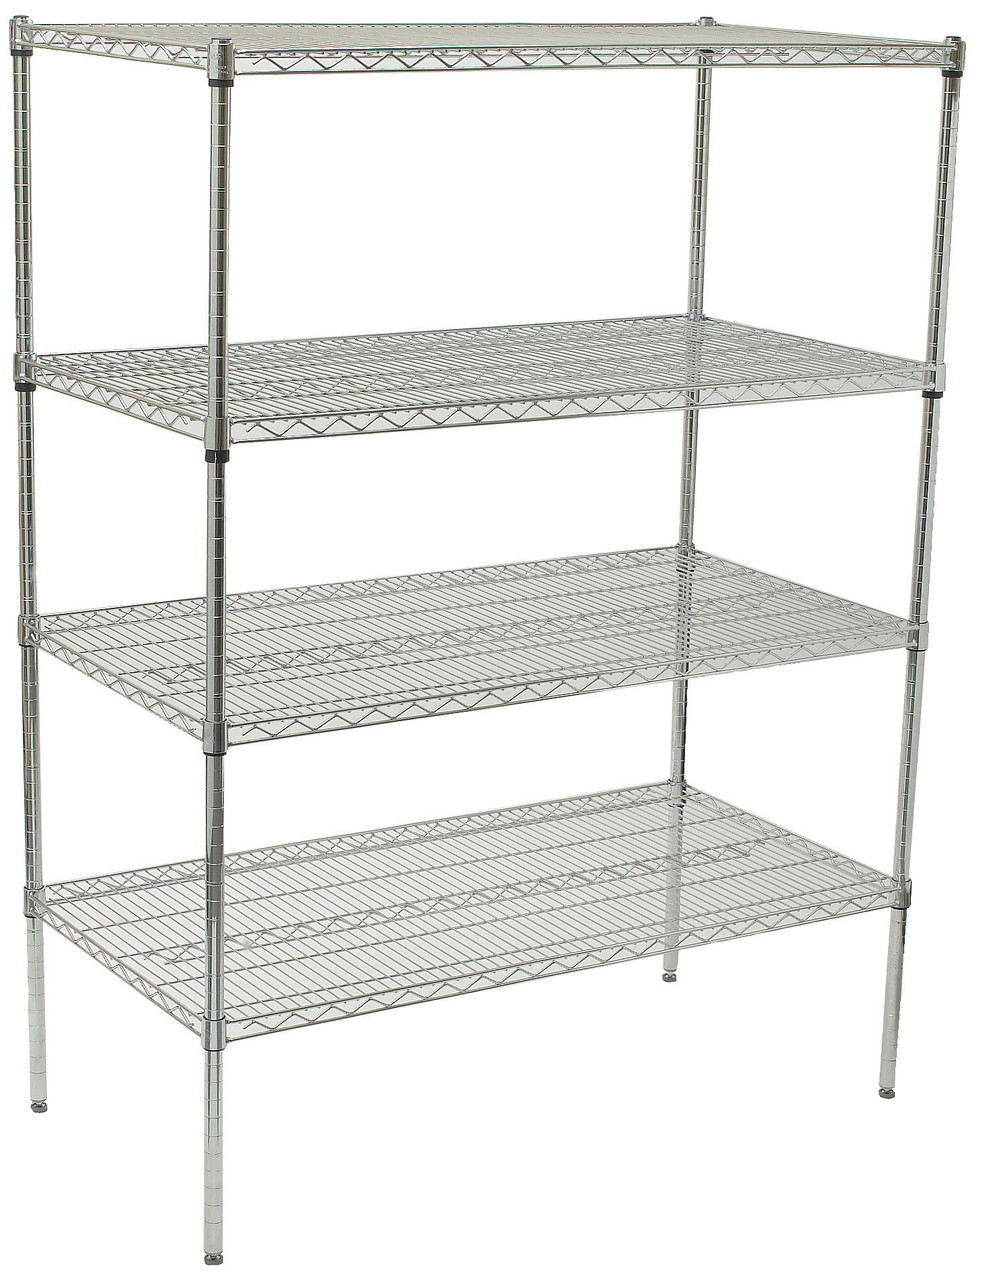 Winco 4-Tier Wire Shelving Set, Chrome Plated, 18" x 36" x 72"